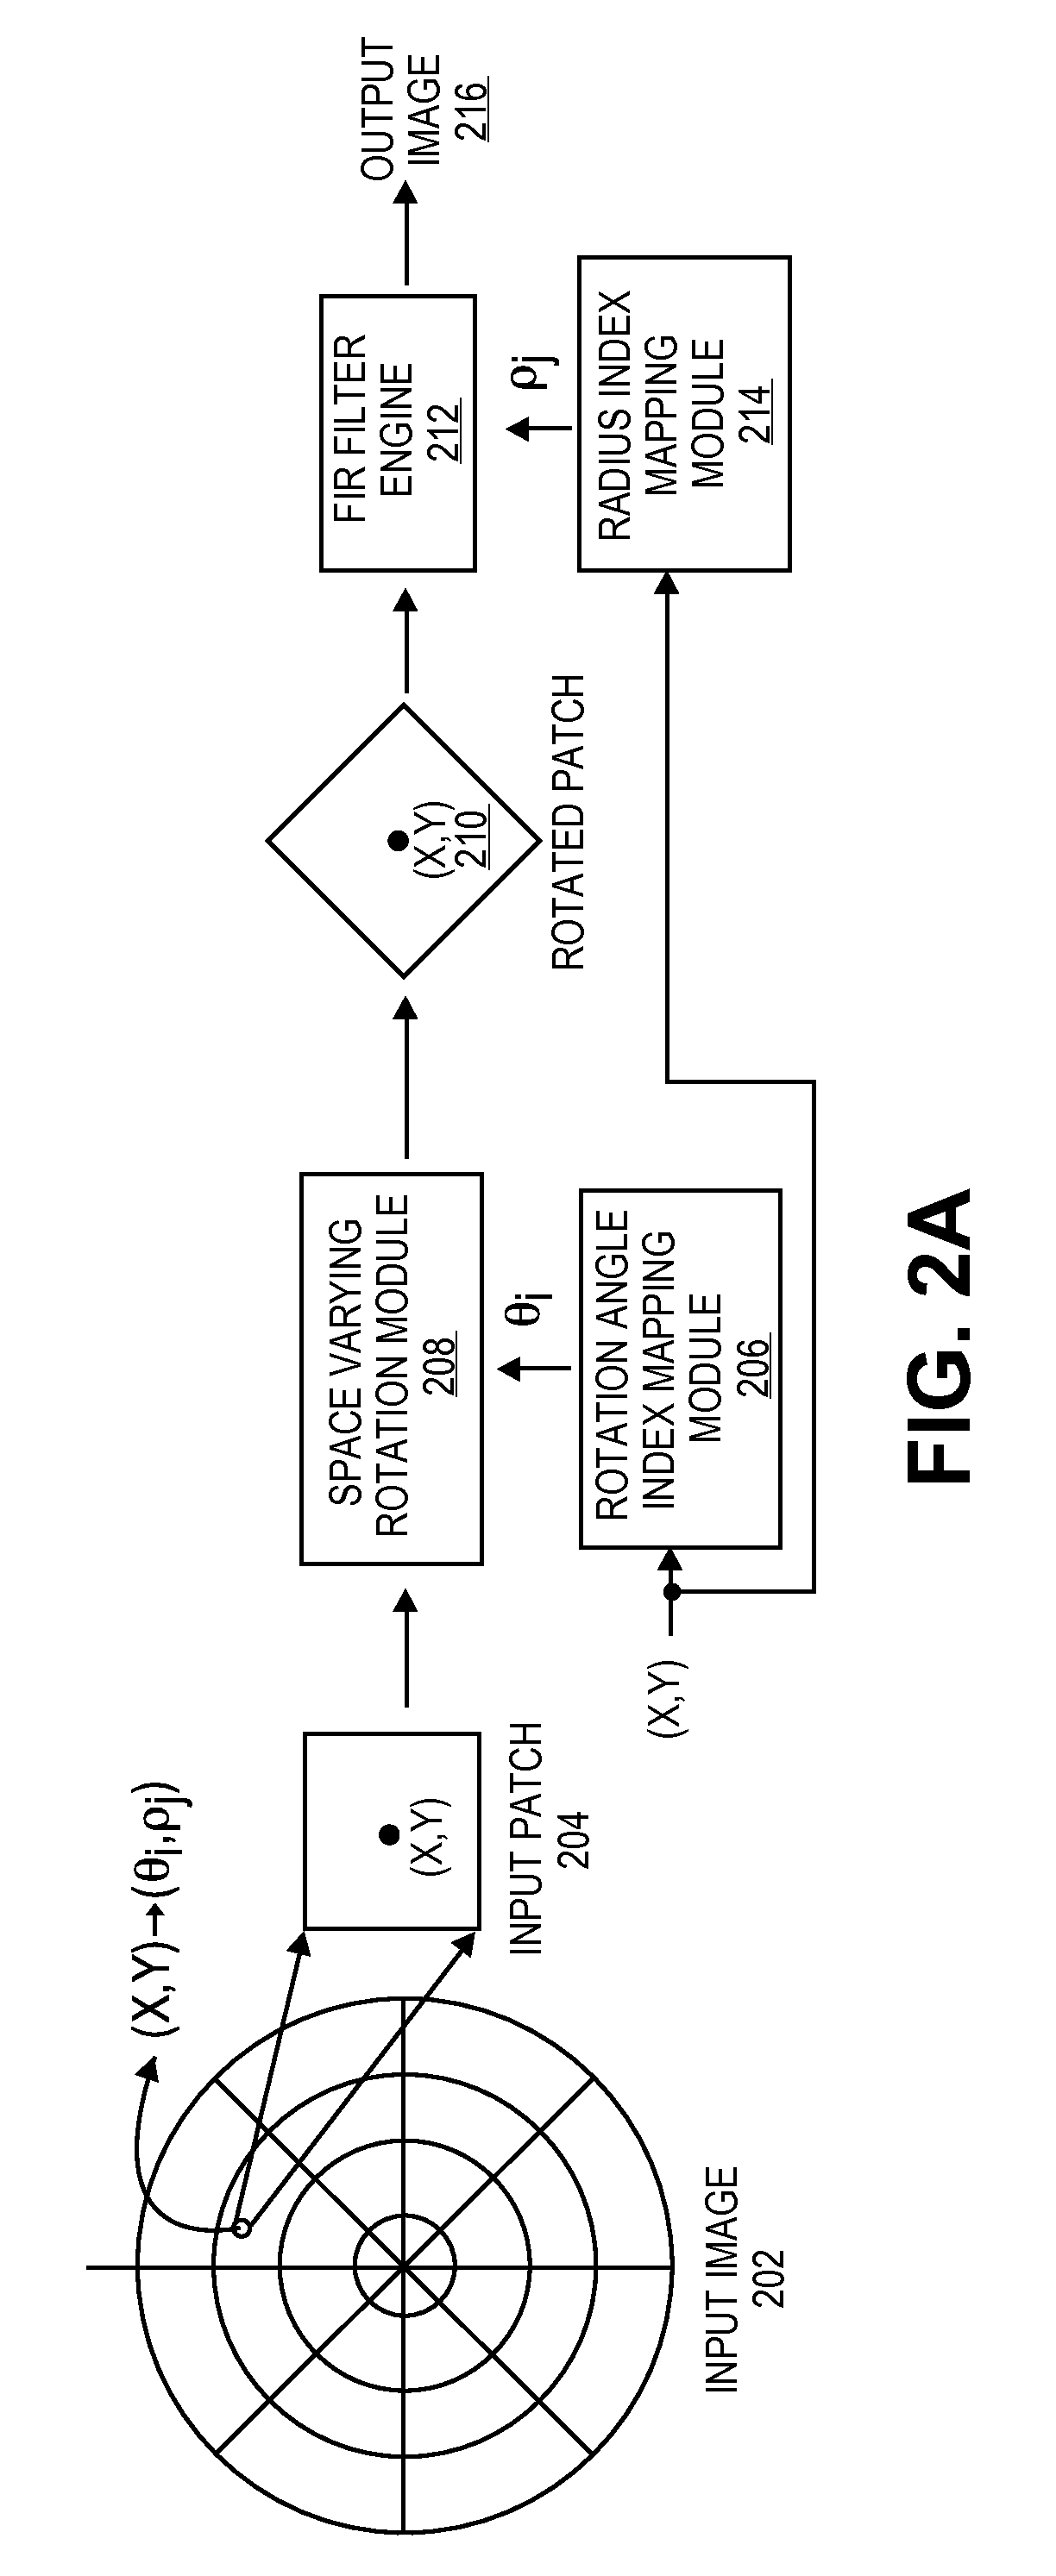 Method and Apparatus for FIR Filtering Using Space-Varying Rotation